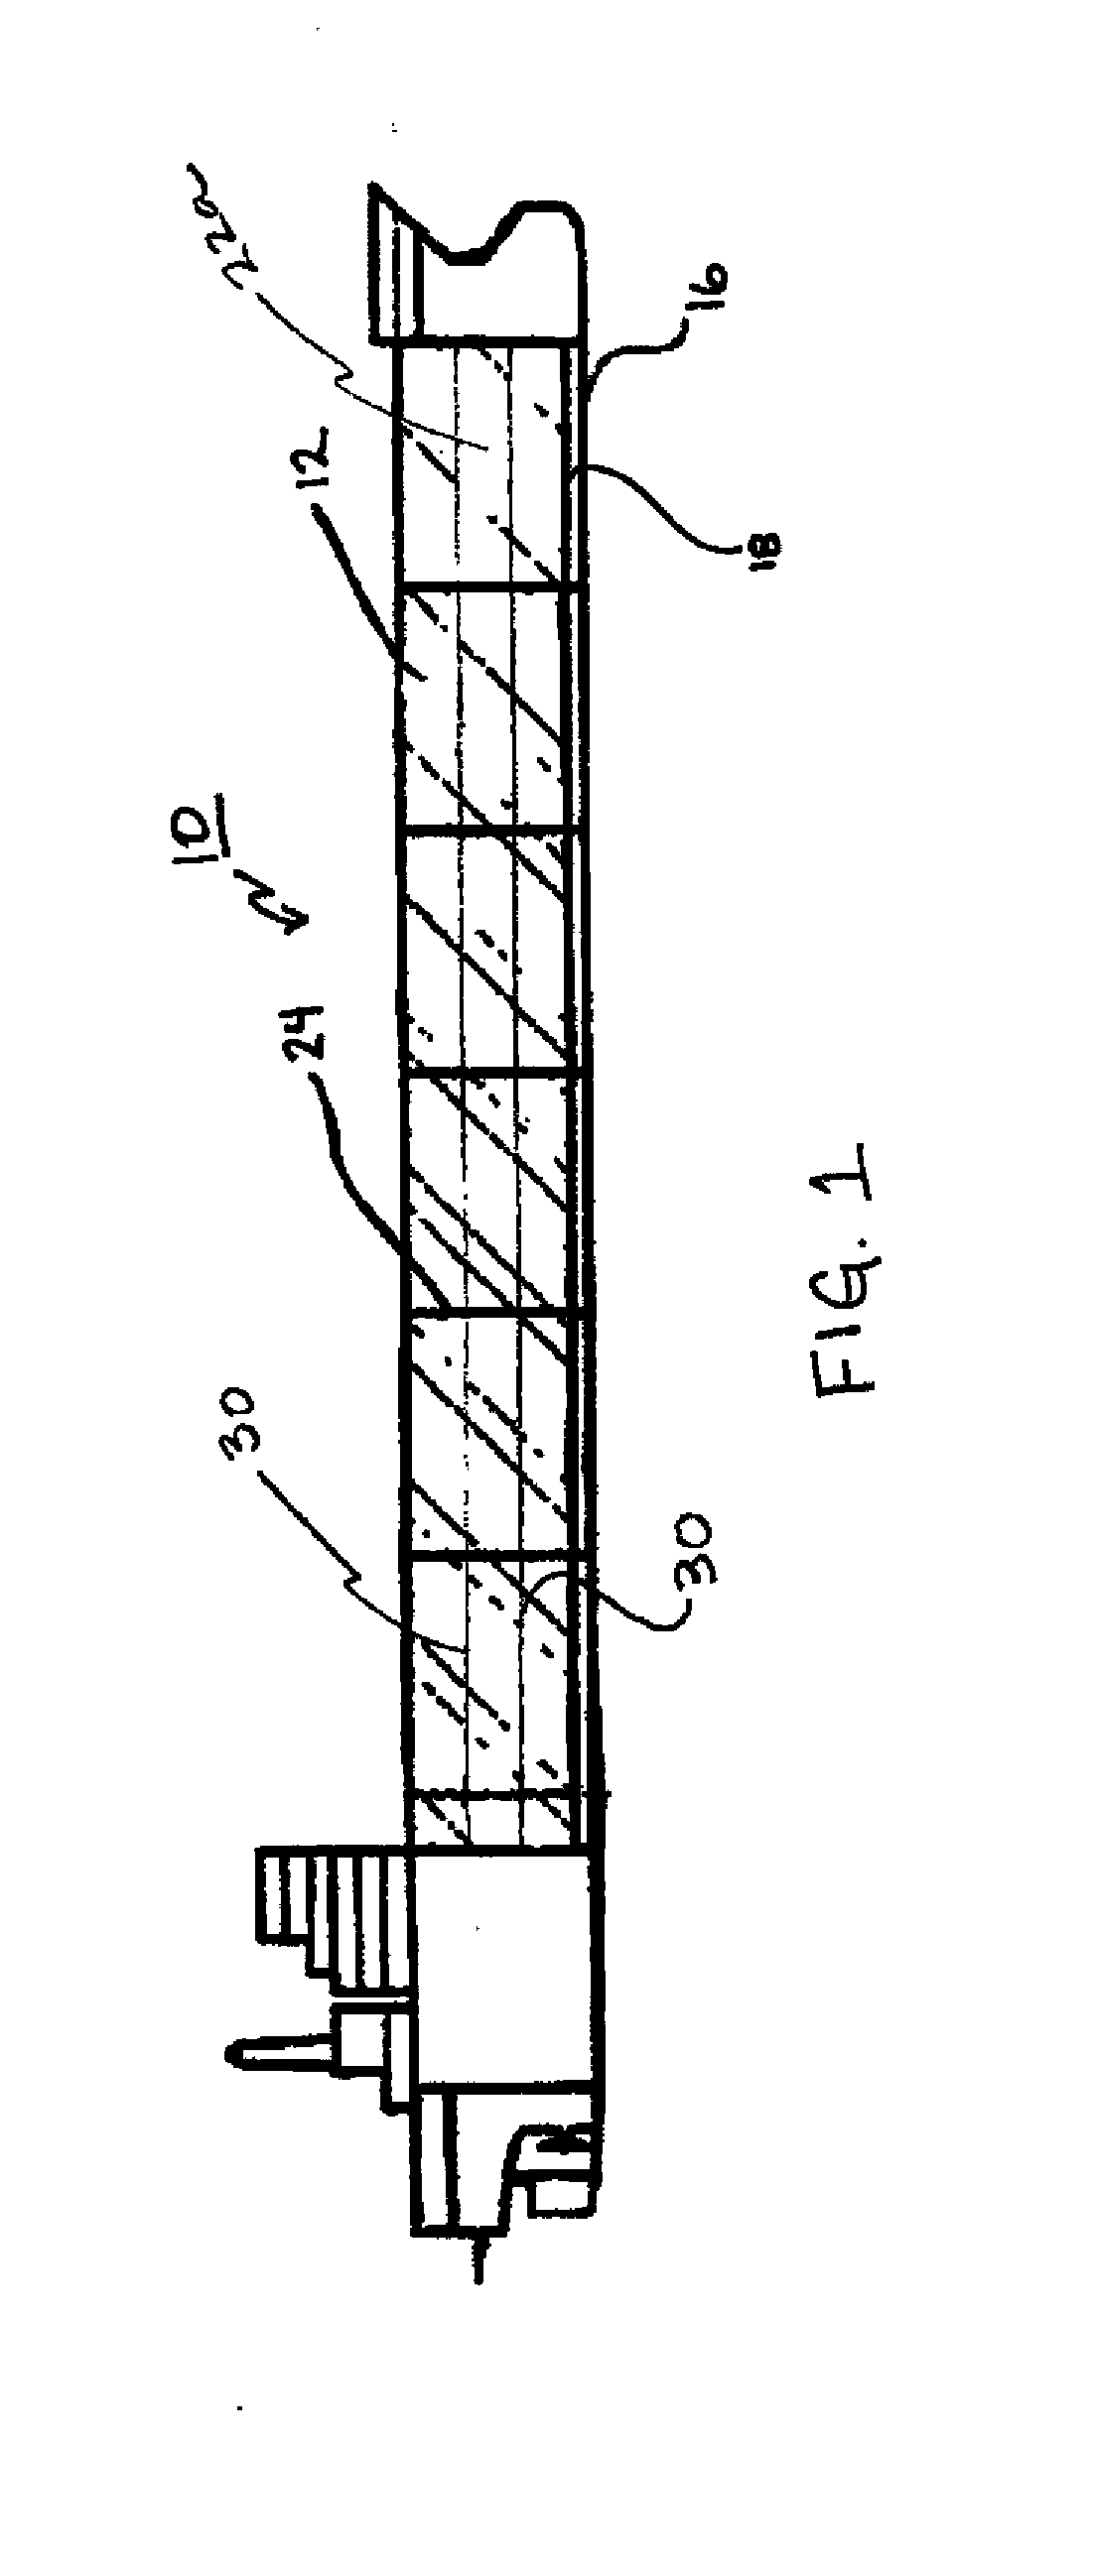 System and method for remote inspection of liquid filled structures